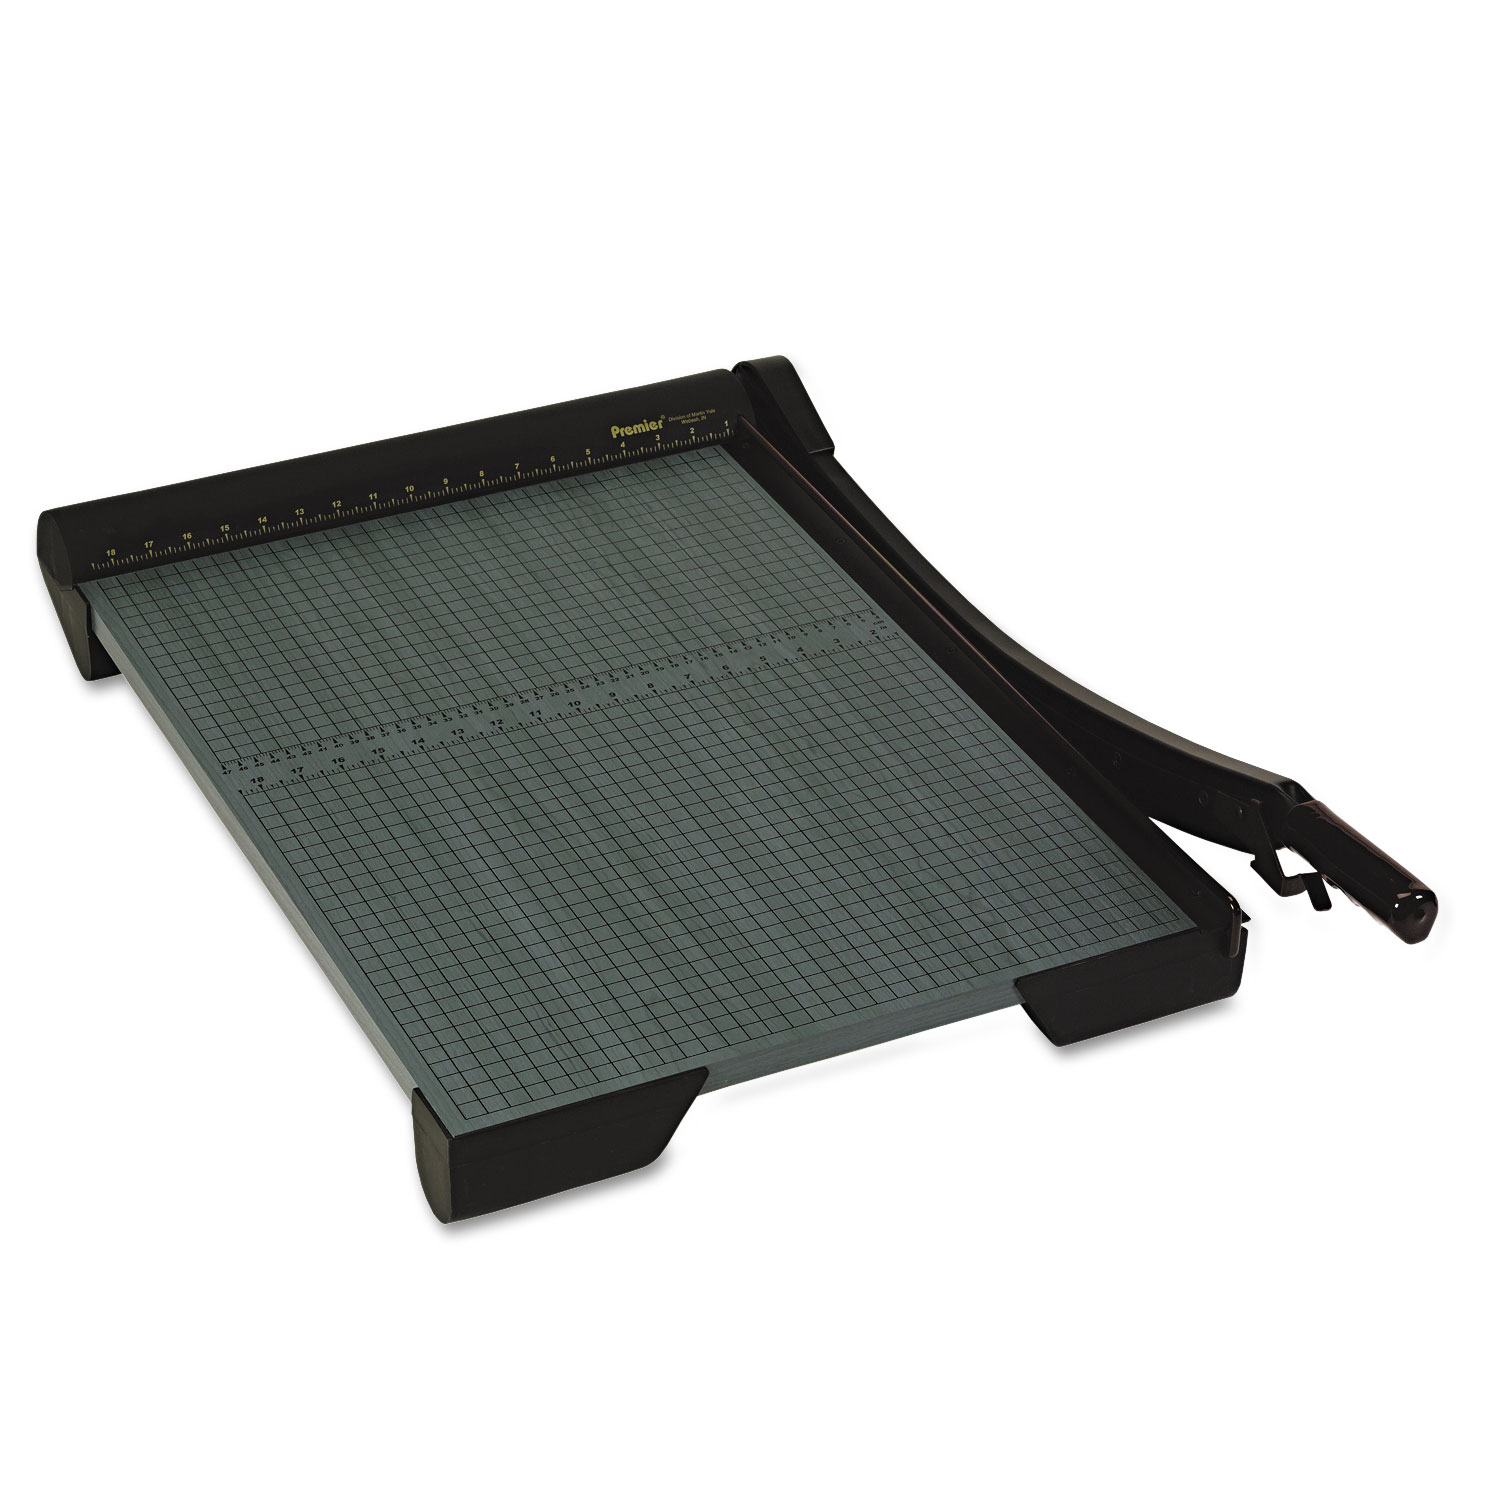 The Original Green Paper Trimmer, 20 Sheets, Wood Base, 18 3/4 x 27 1/4